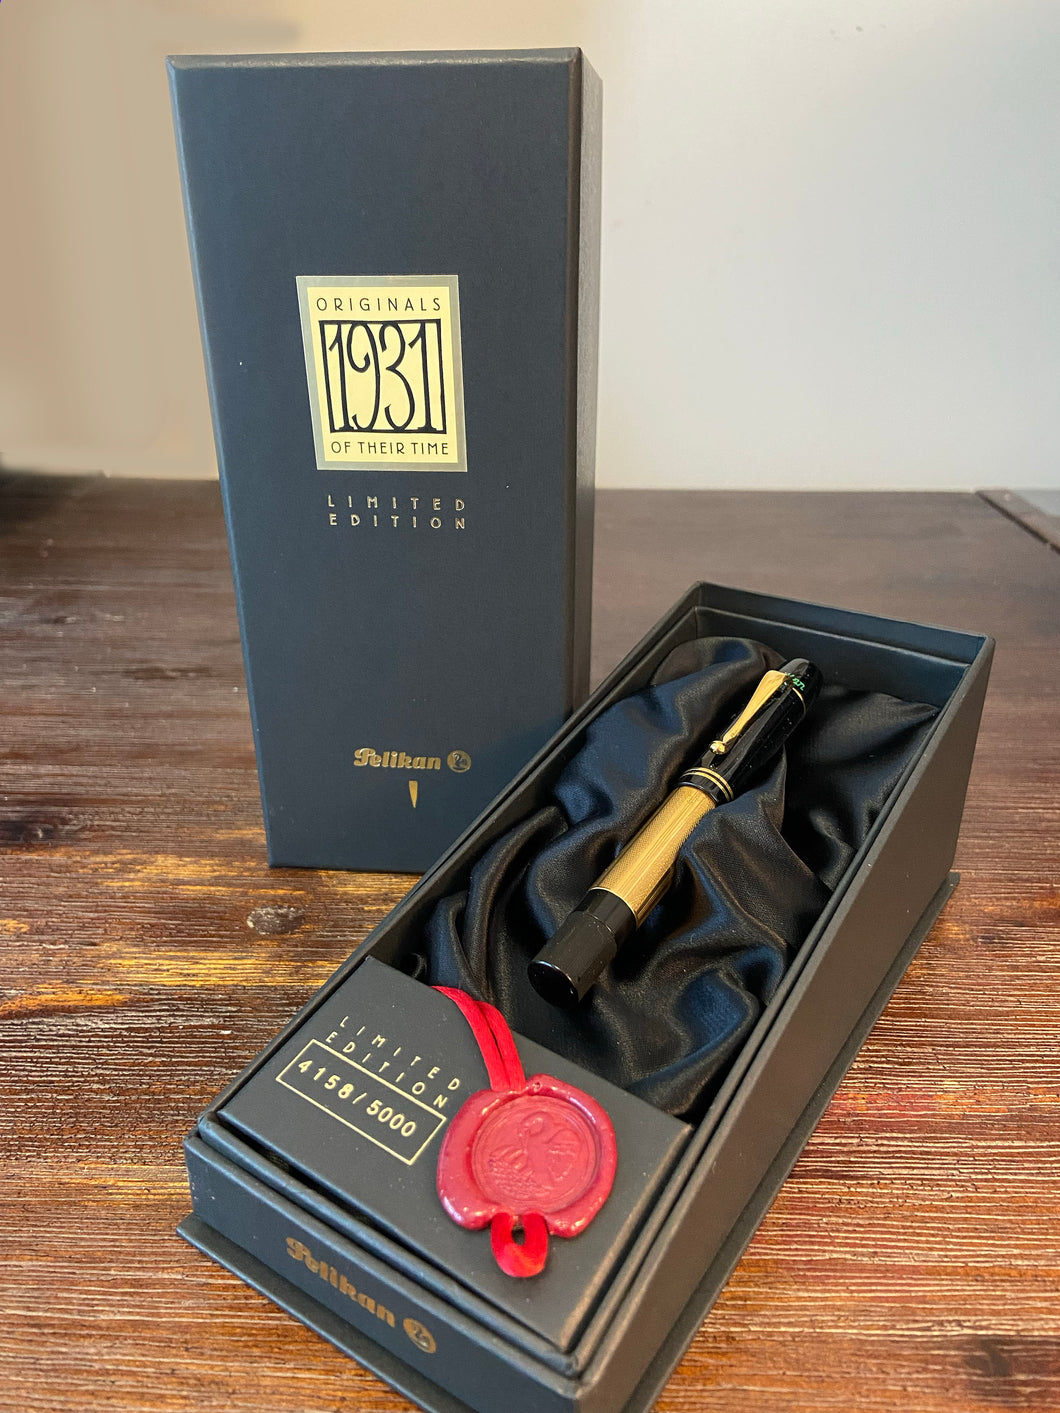 Pelikan Originals of their time, 1931 Gold, Limited Edition